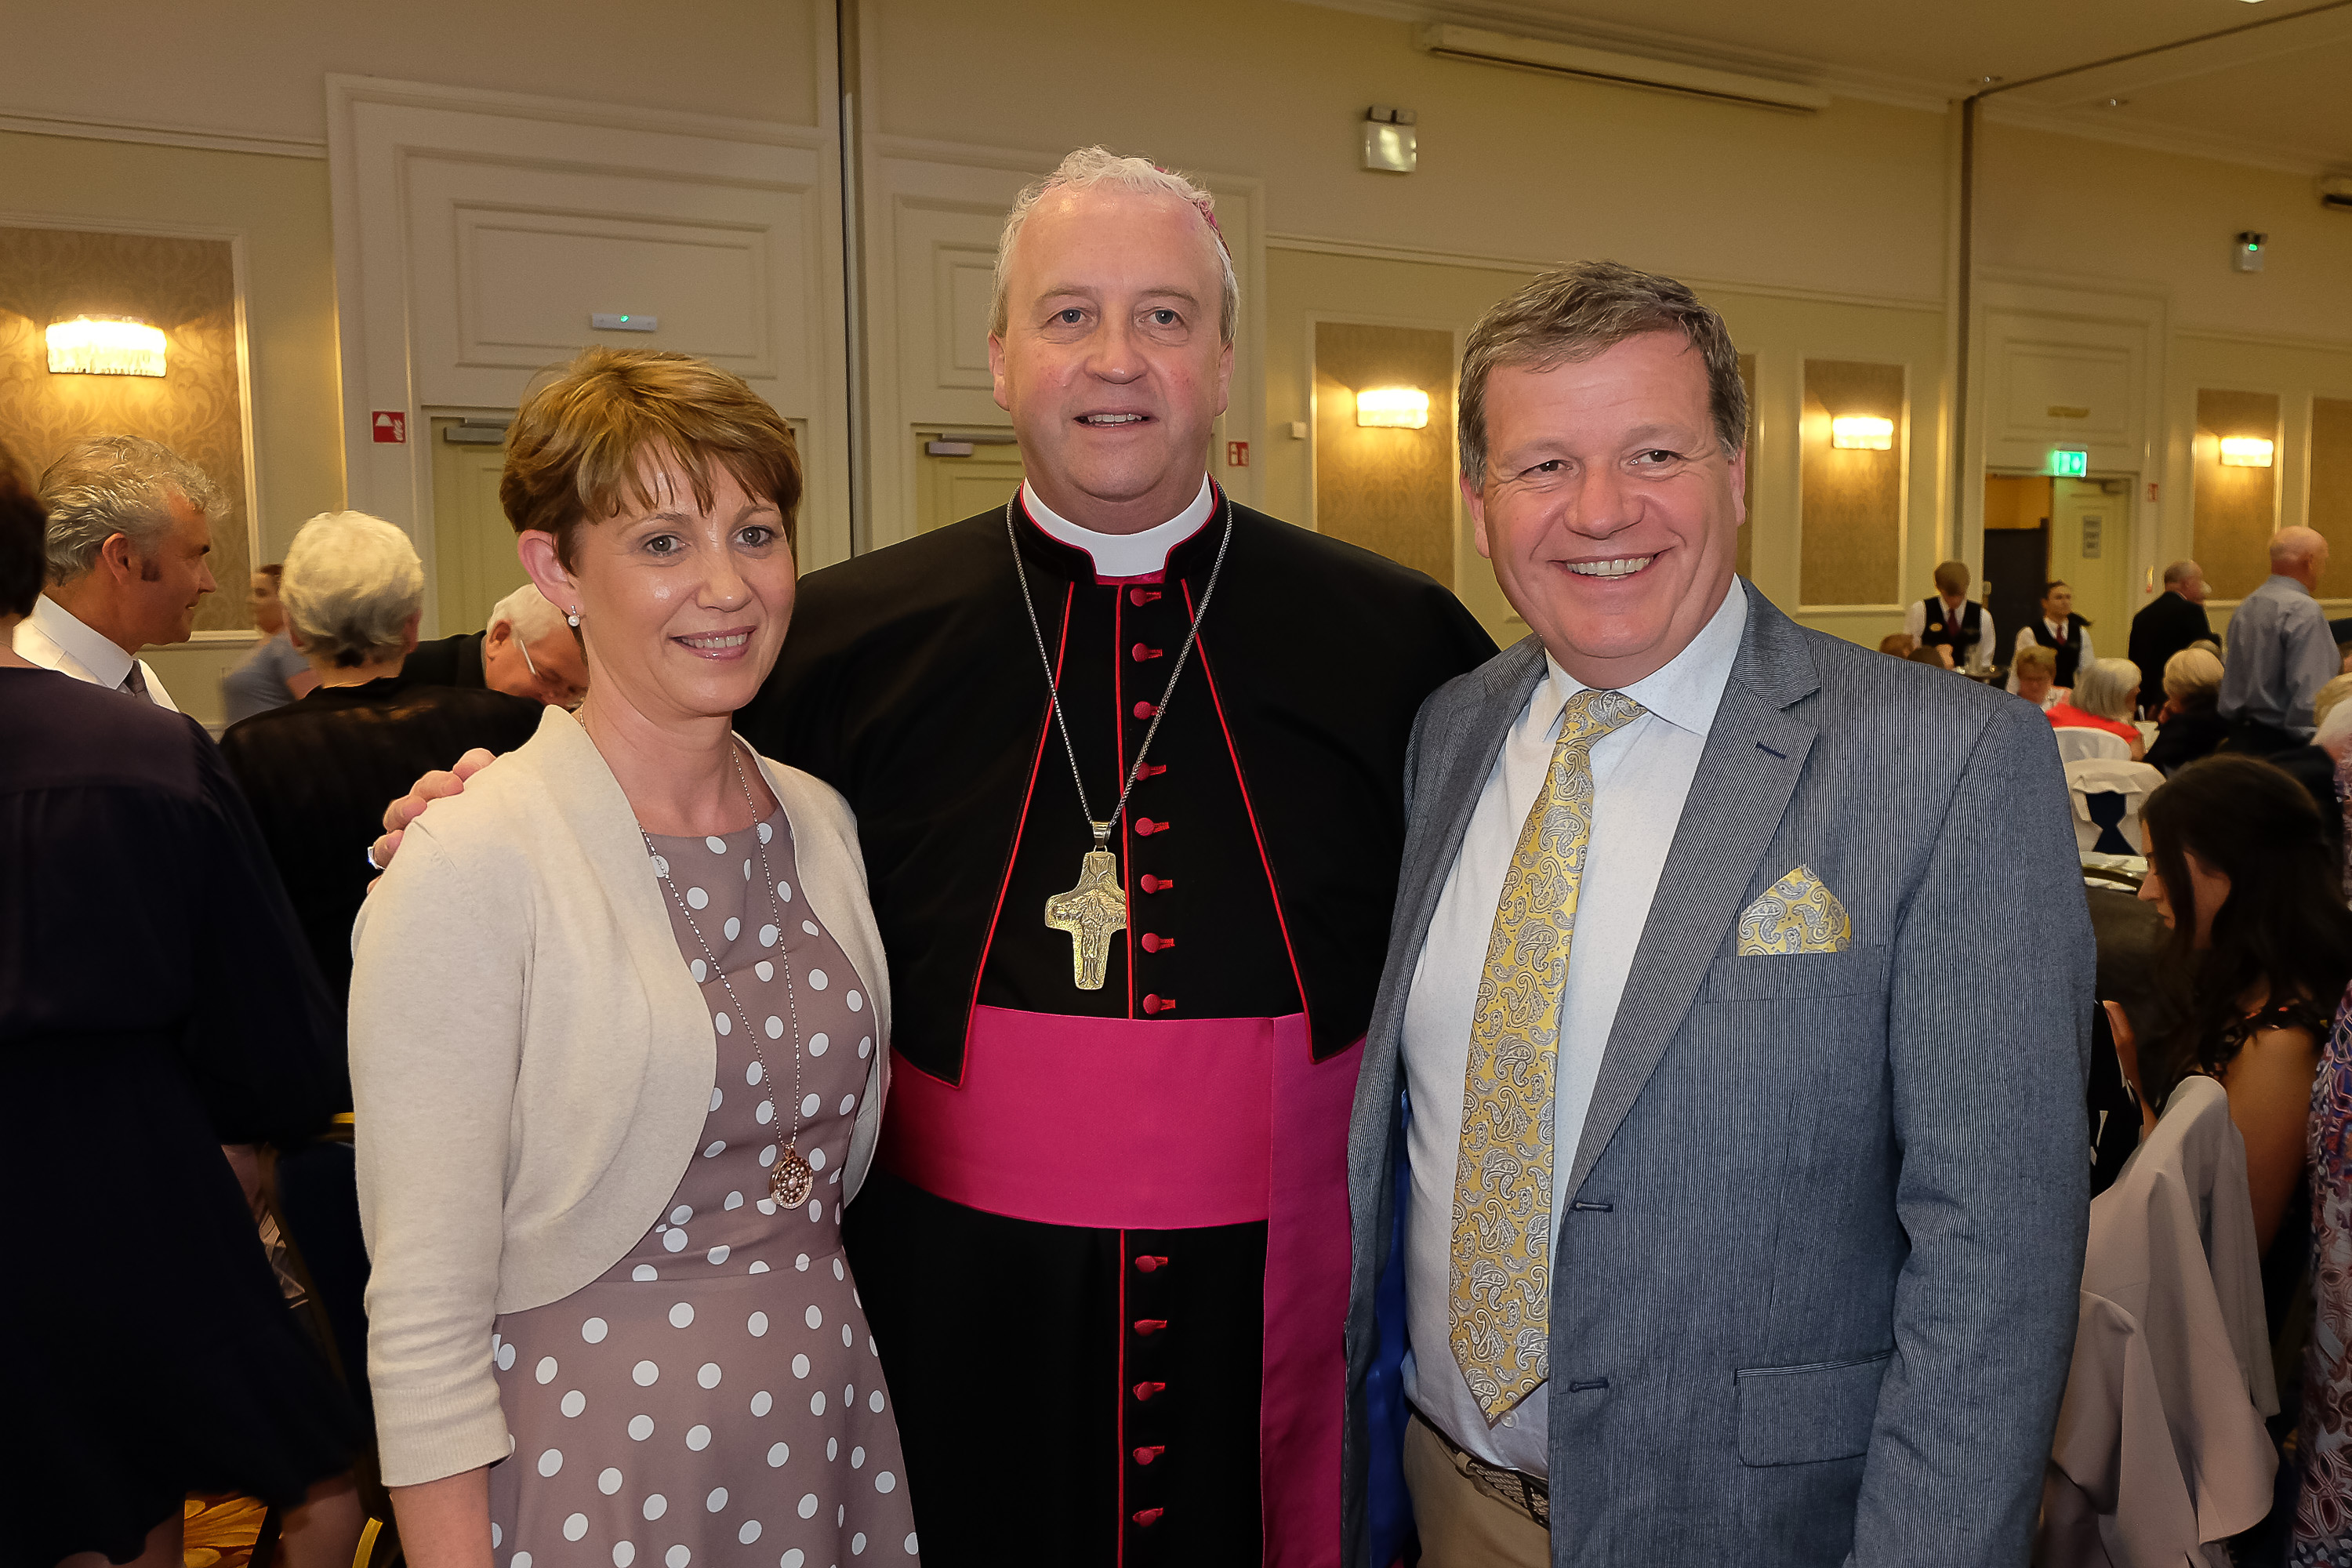 Siobhan and Patrick Farrelly with the new Bishop Michael Router at a celebration dinner following the Bishop's Ordination Armagh City Hotel, Armagh,  21 July 2019Credit: LiamMcArdle.com2